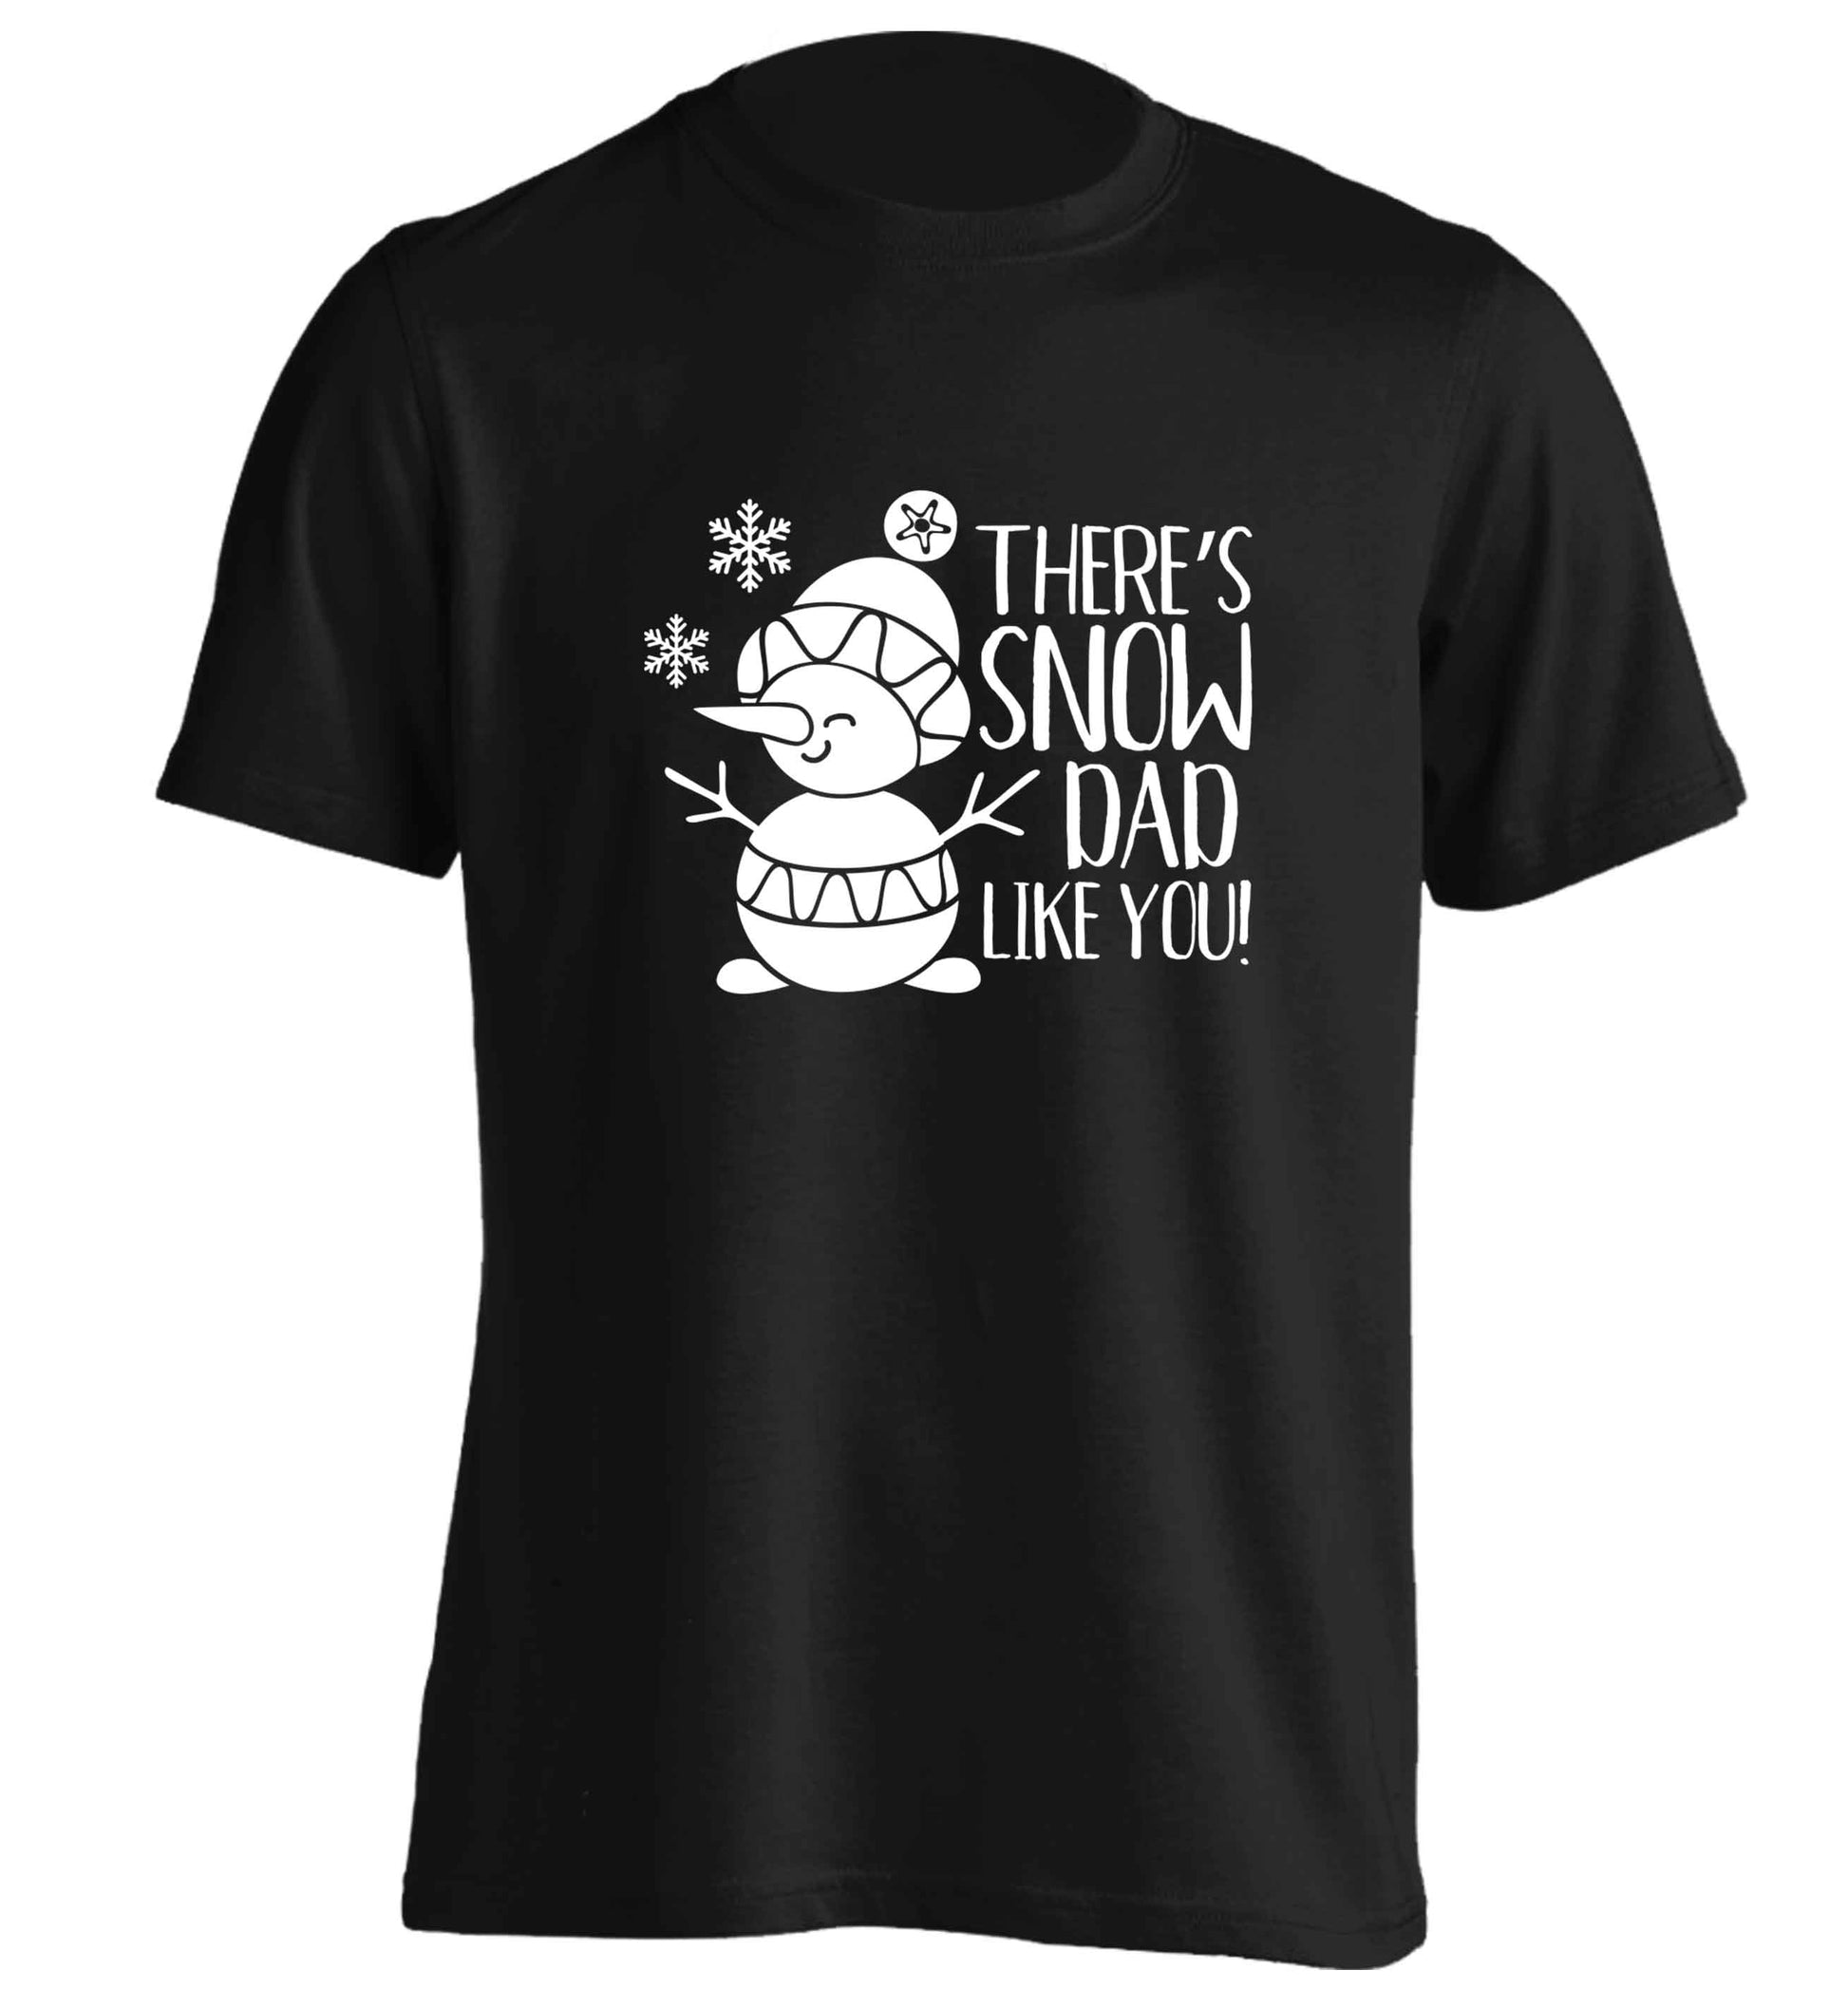 There's snow dad like you adults unisex black Tshirt 2XL